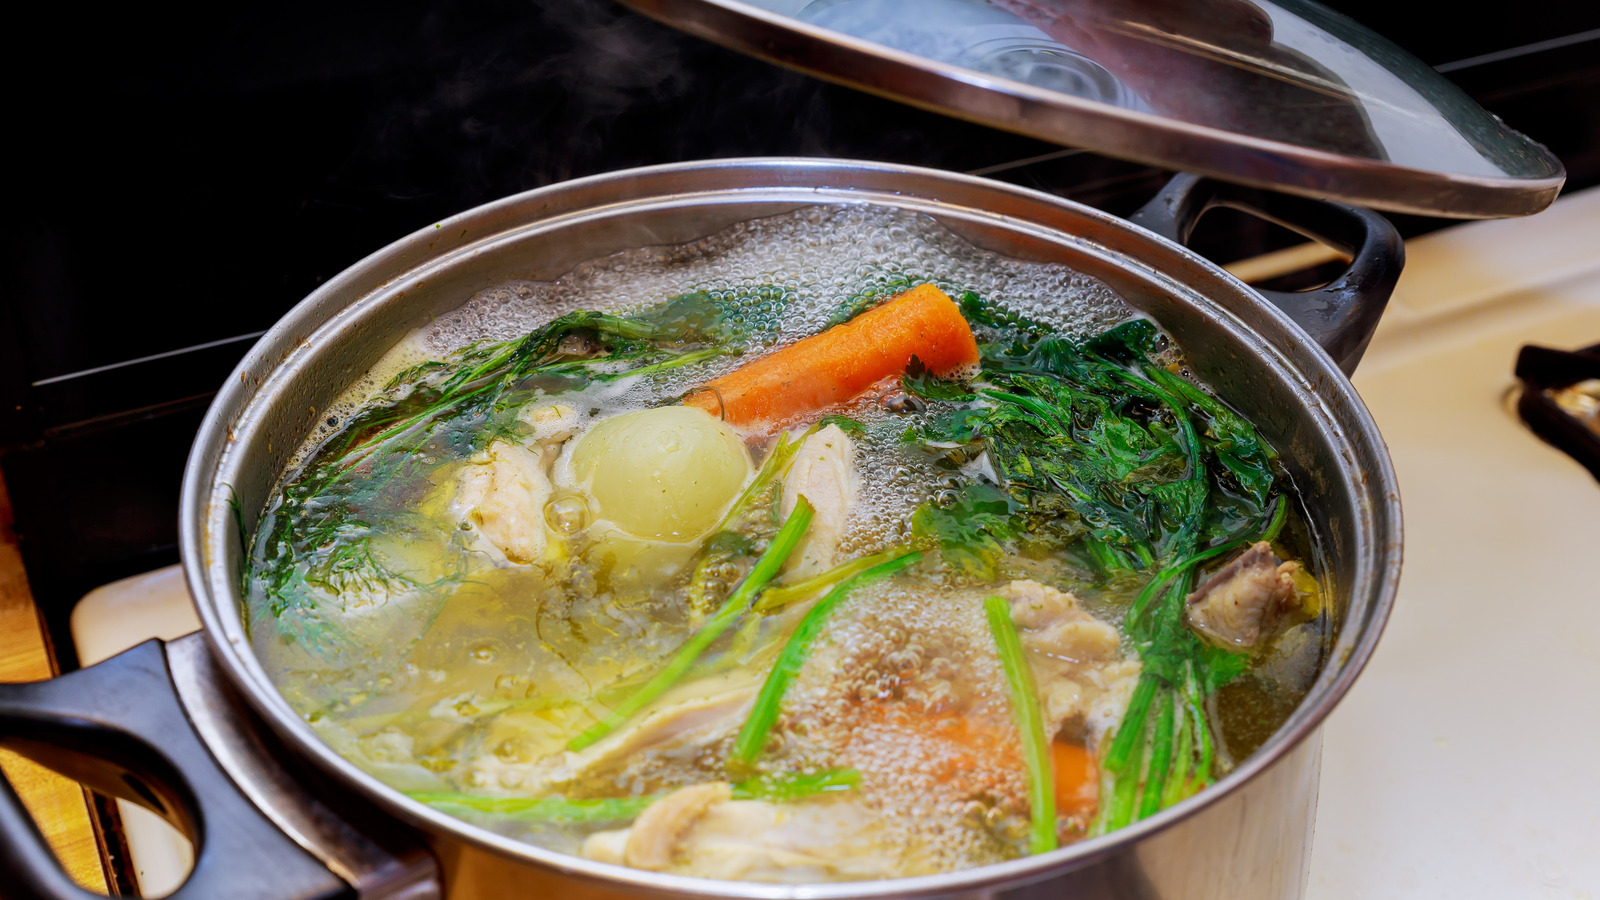 https://www.thedailymeal.com/img/gallery/14-ways-youre-messing-up-homemade-chicken-broth/l-intro-1680646118.jpg